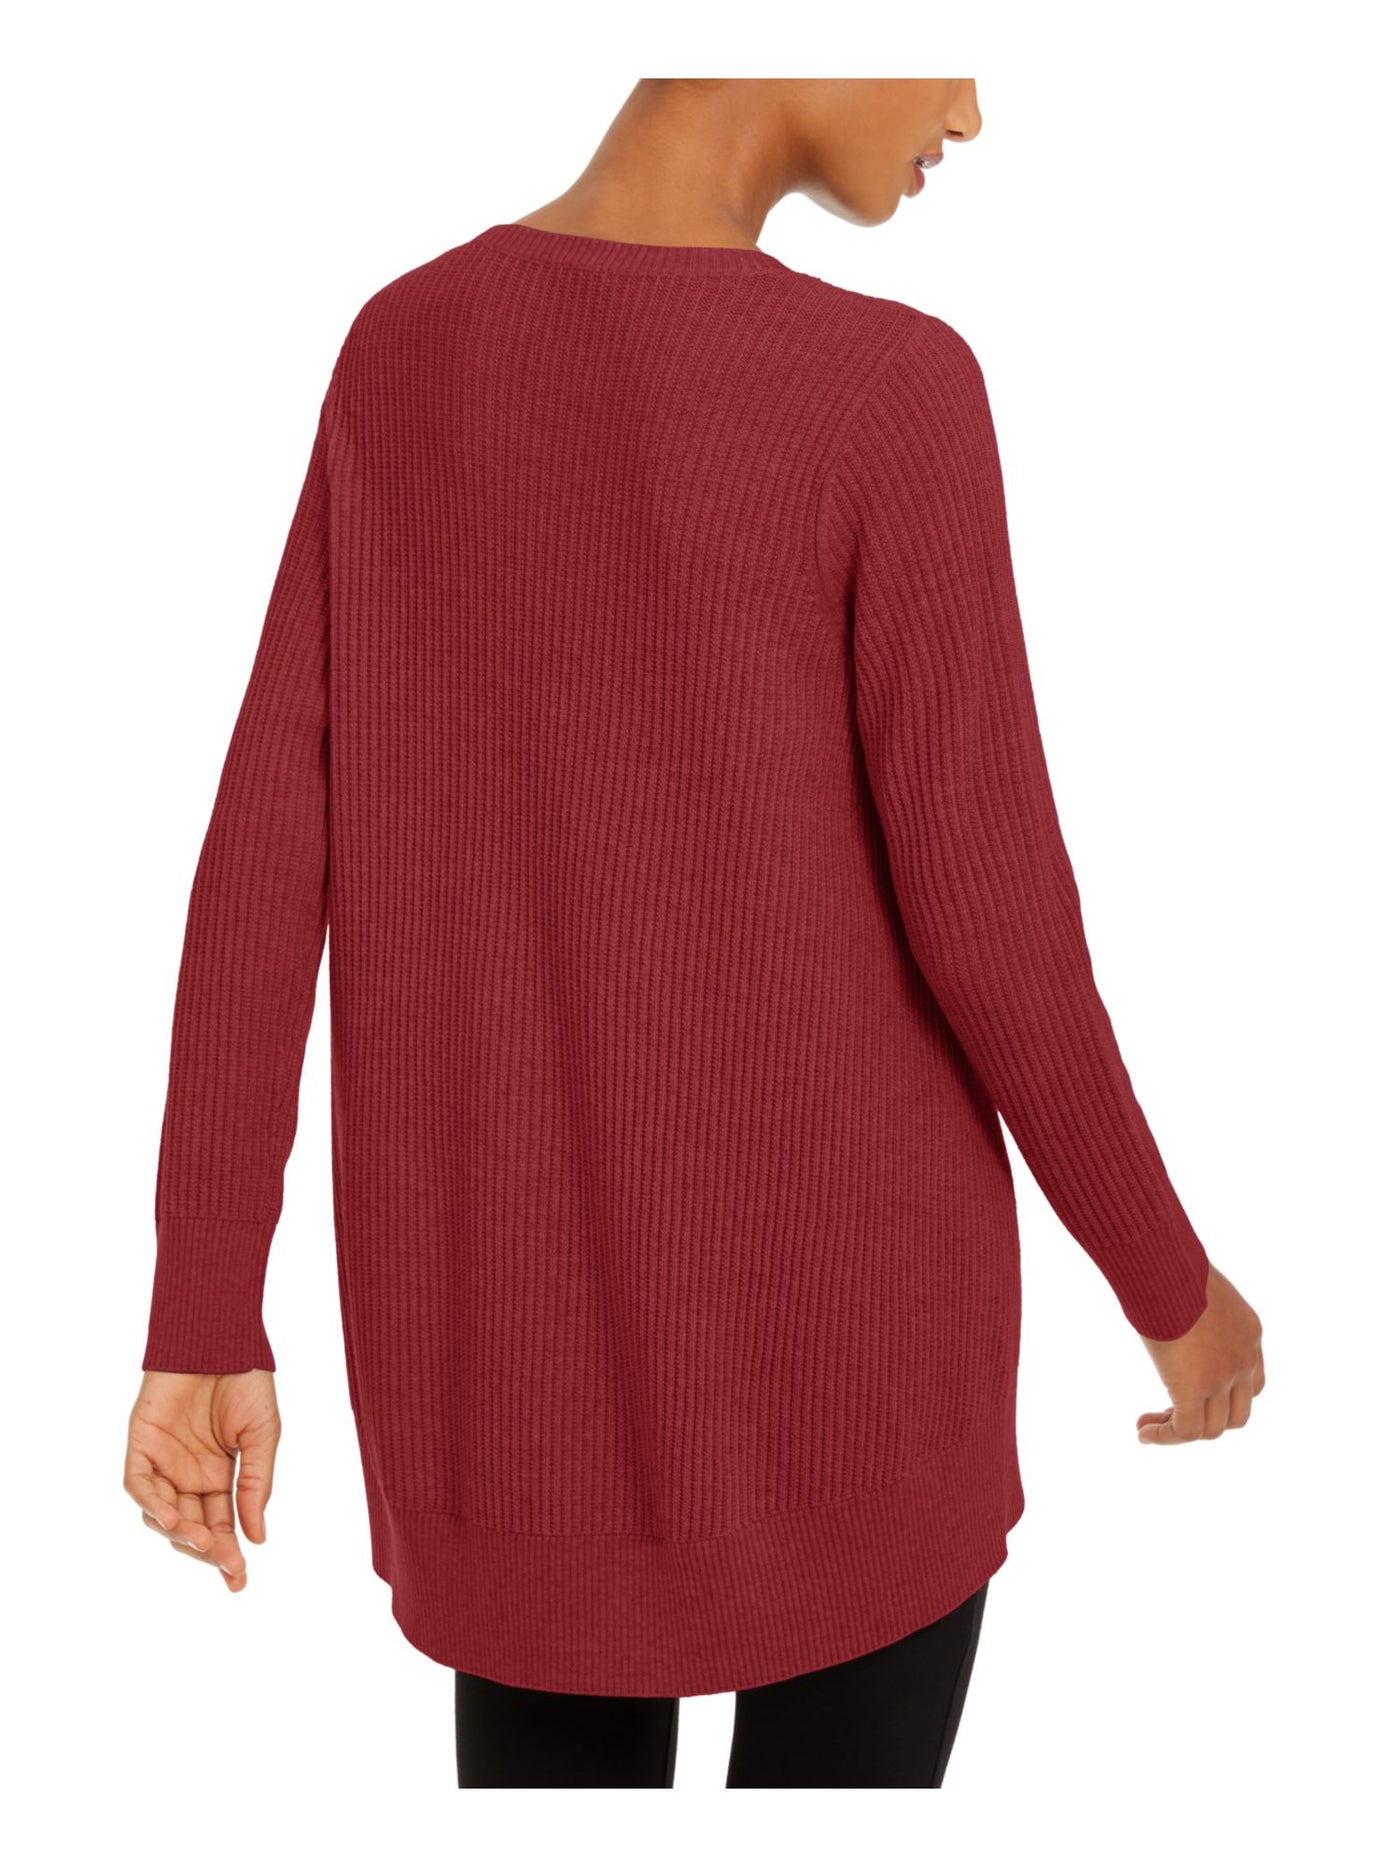 EILEEN FISHER Womens Red Textured Pinstripe Crew Neck Tunic Sweater PP